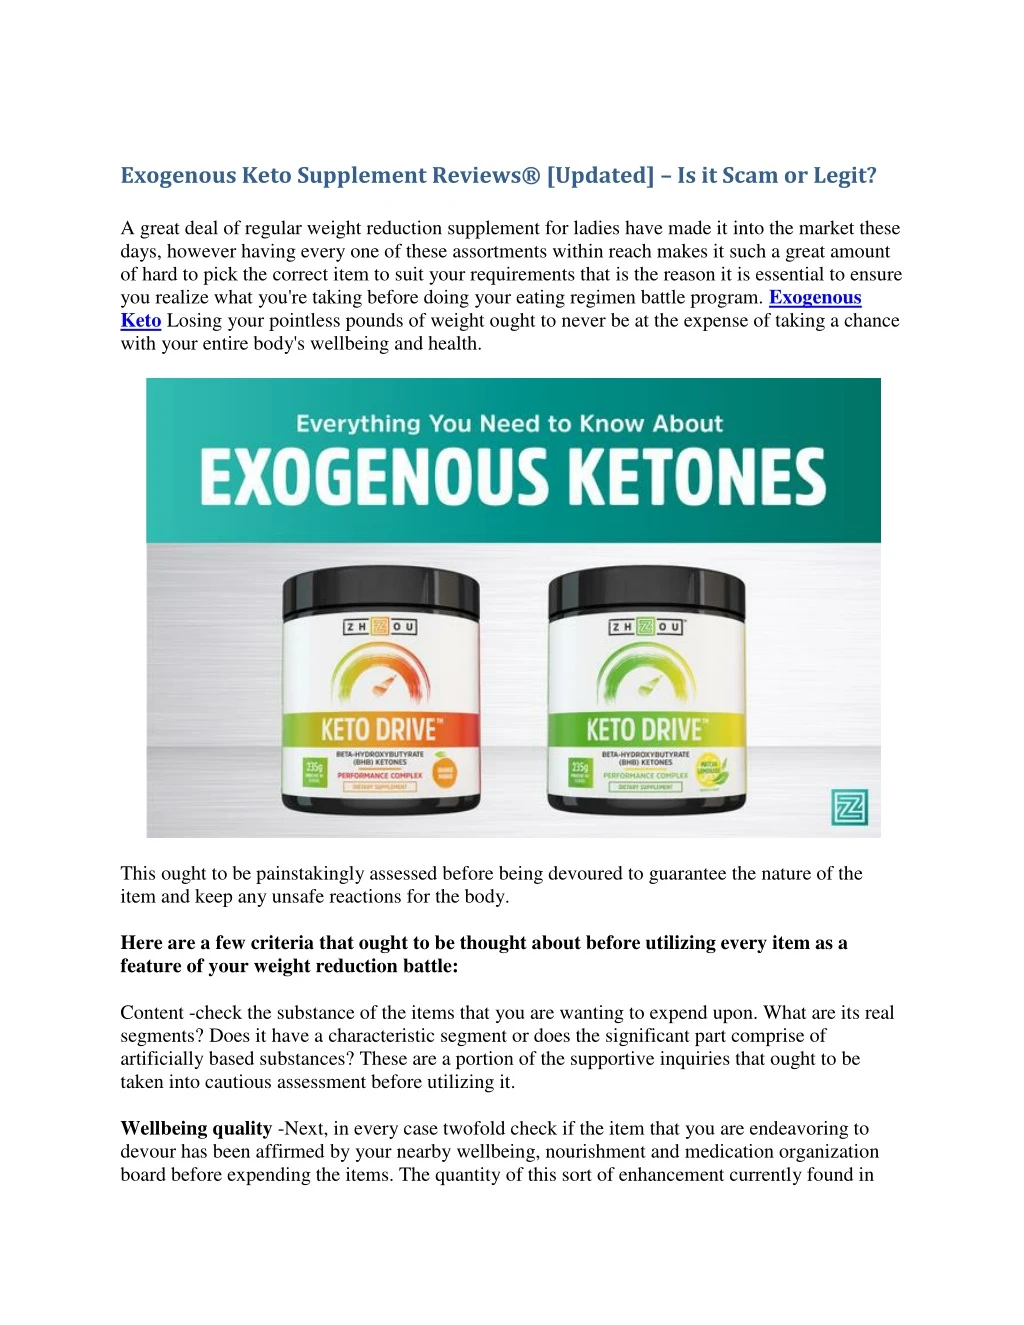 exogenous keto supplement reviews updated